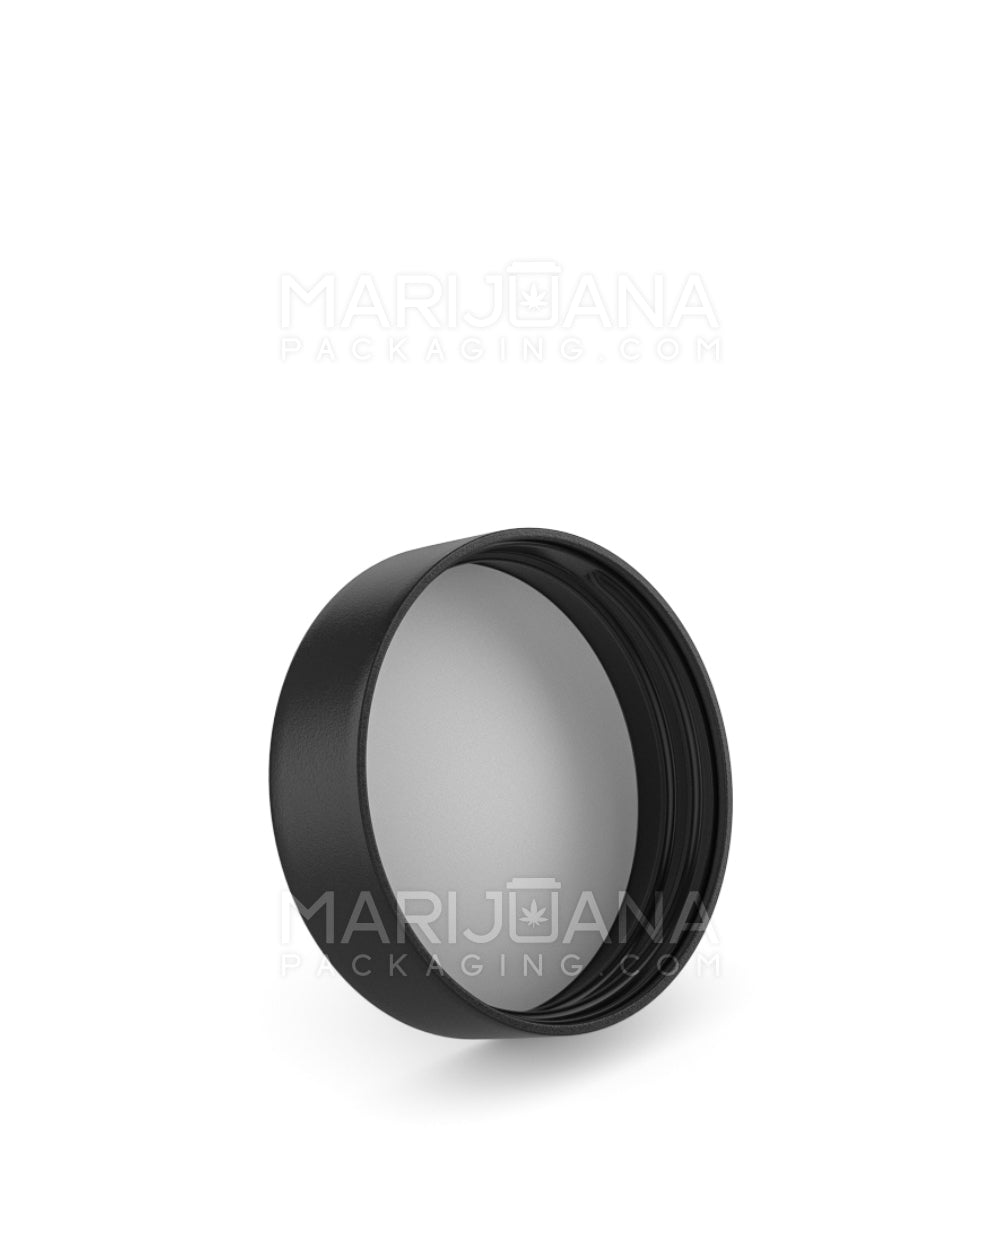 Child Resistant | Smooth Push Down & Turn Plastic Caps w/ Pressure Seal Liner | 50mm - Matte Black - 100 Count